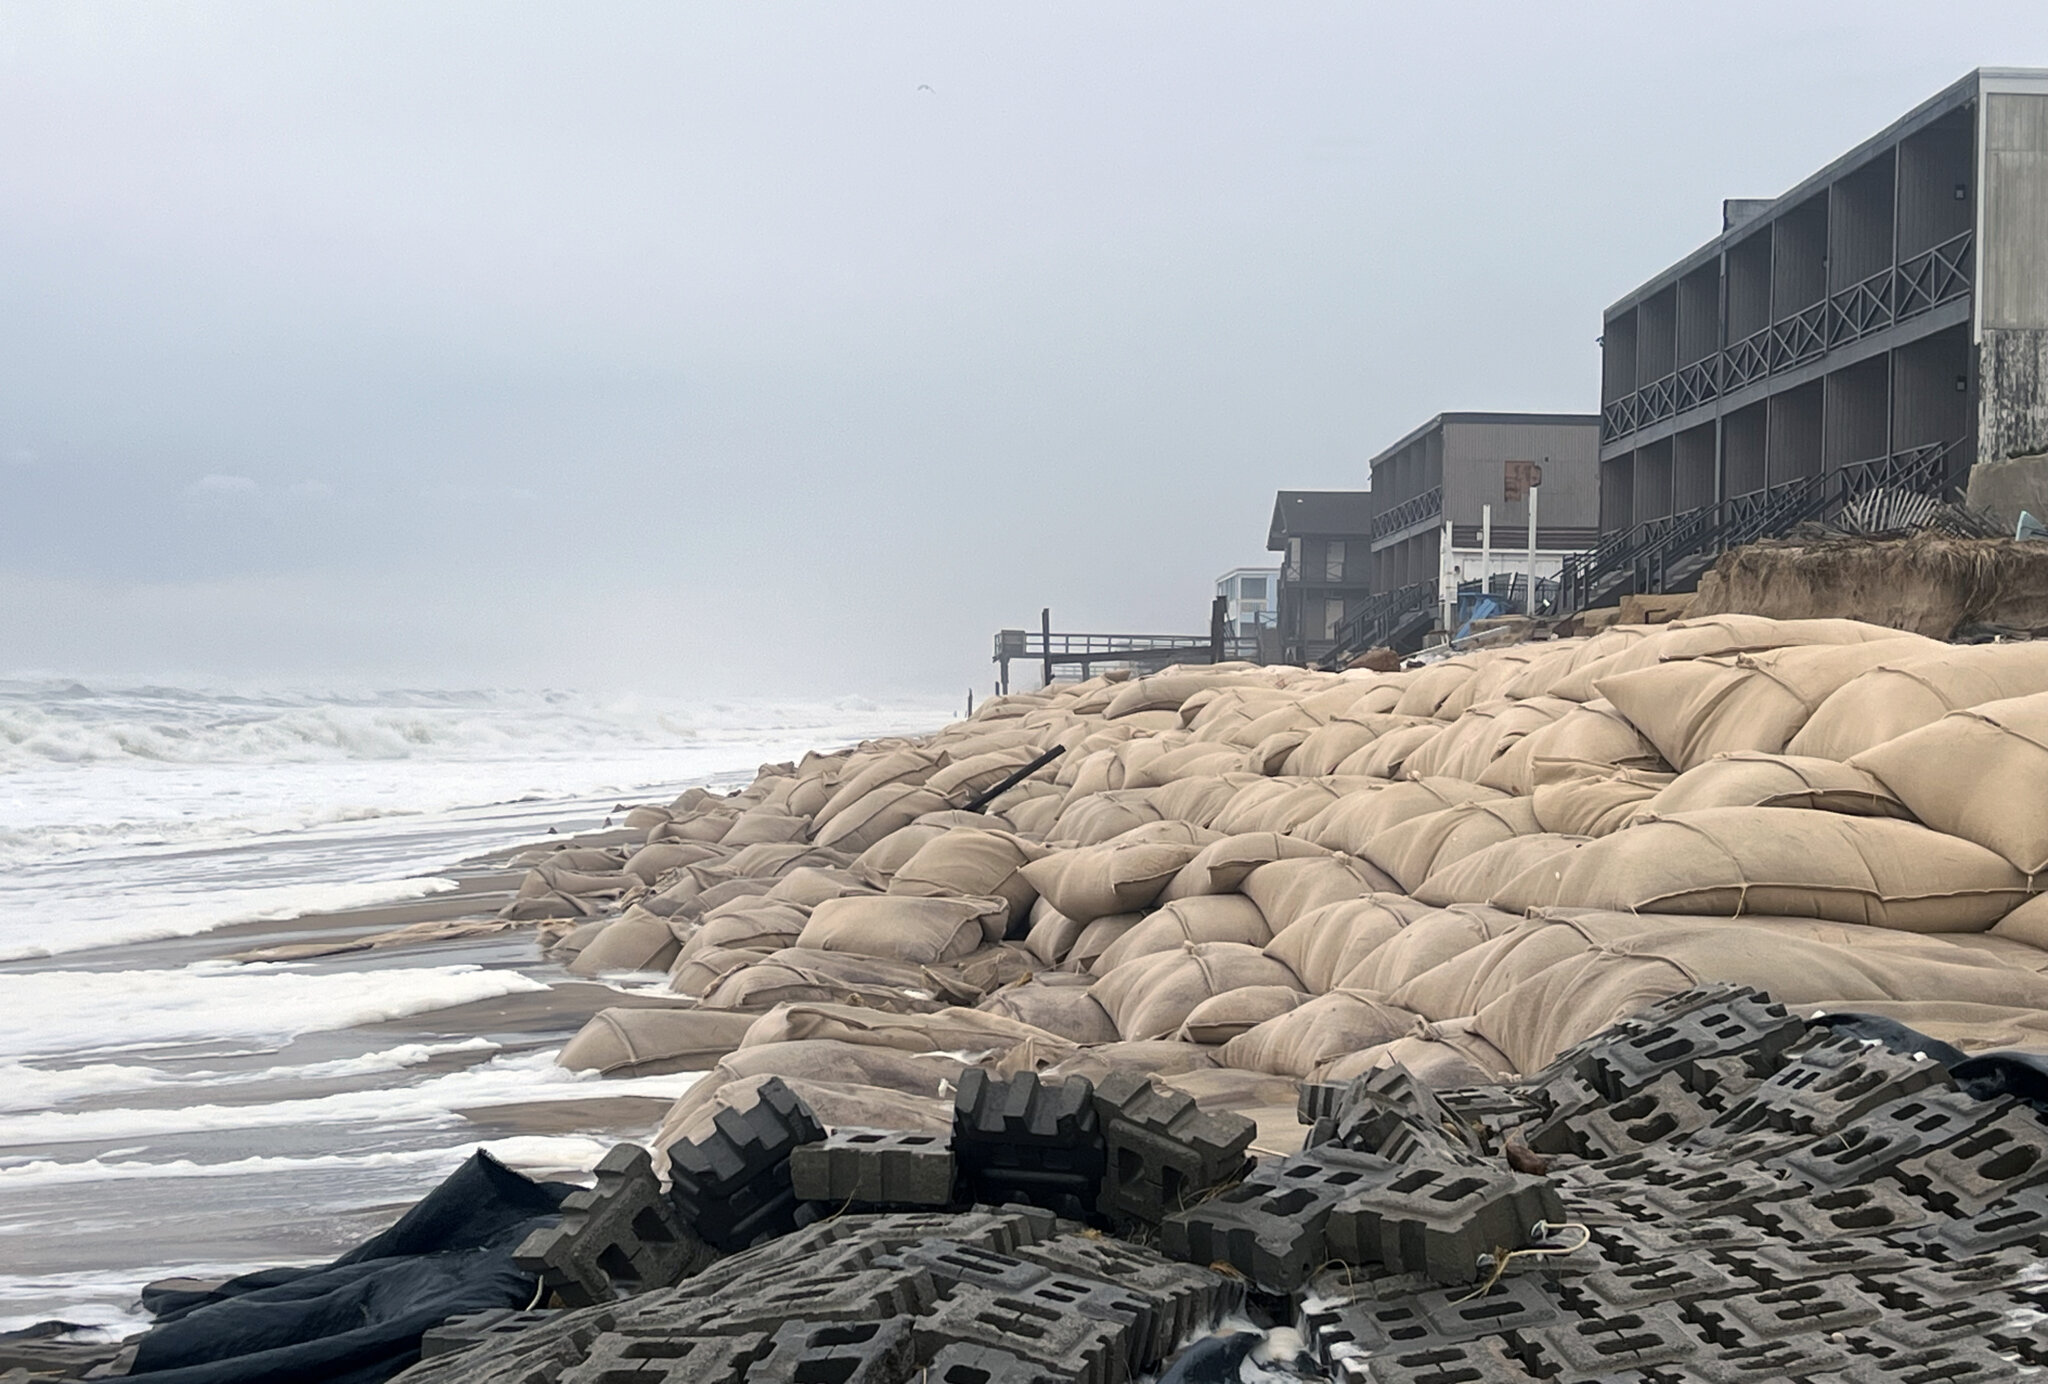 Recent storms left their mark on the Montauk oceanfront